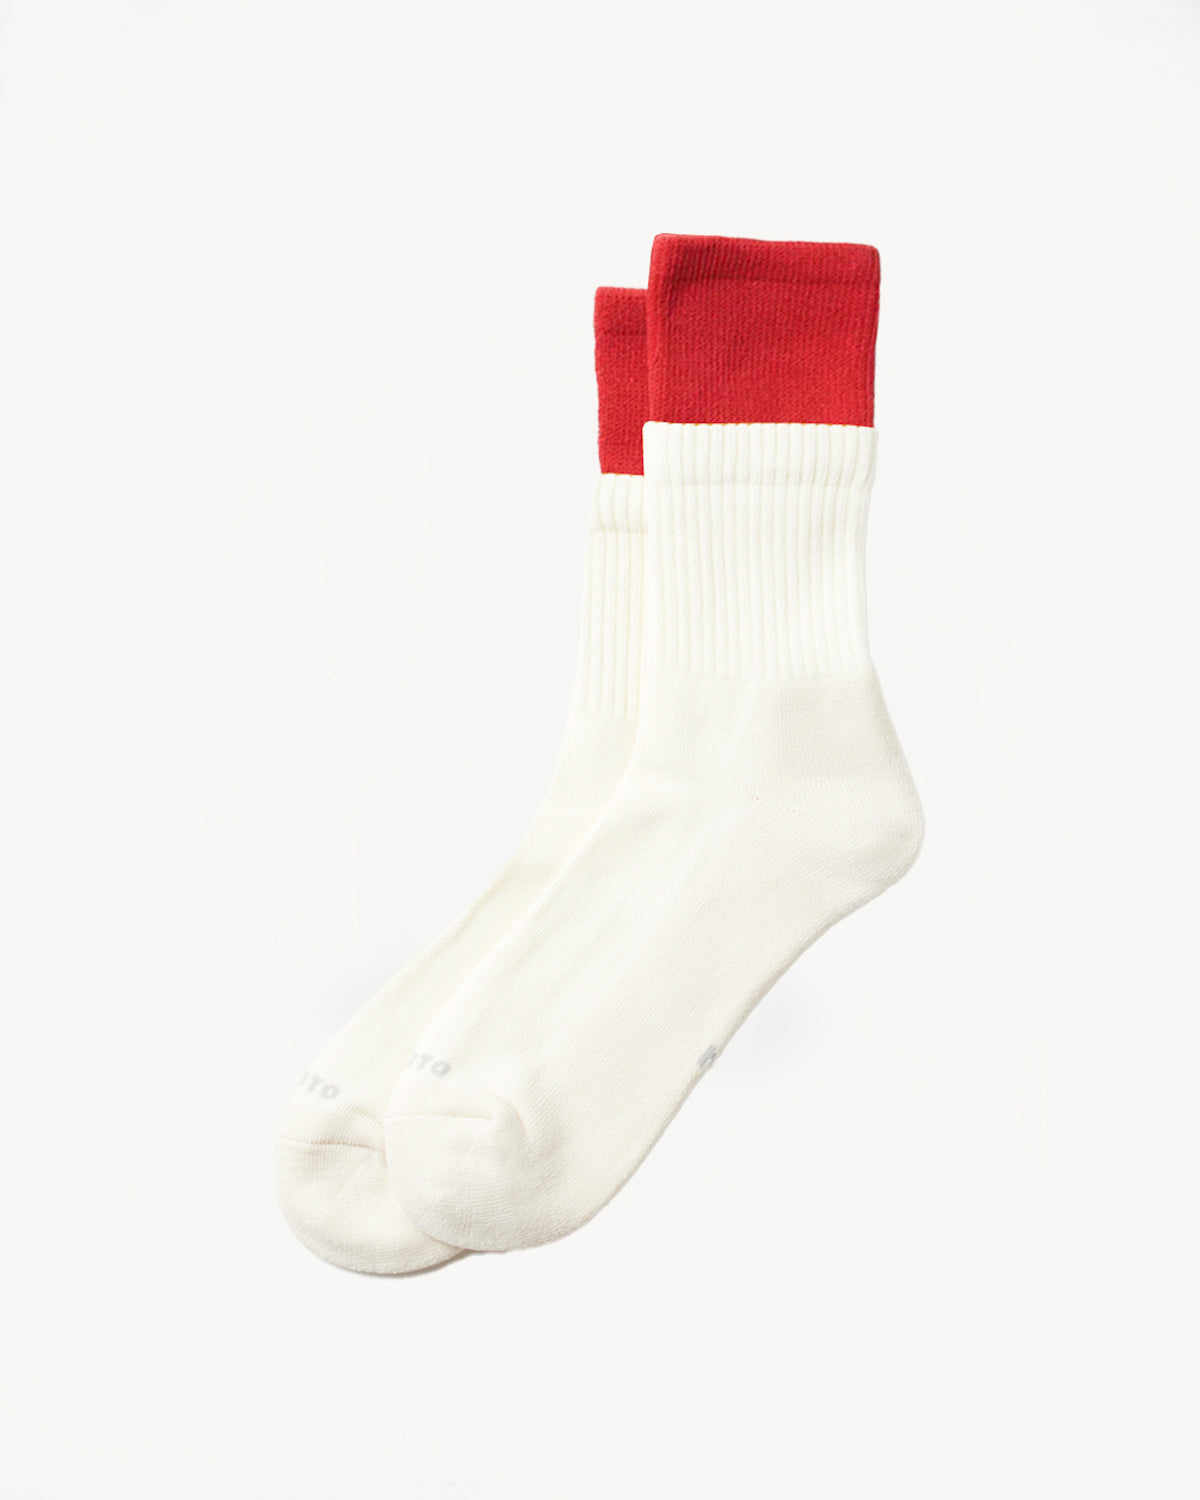 R1421 - Organic Cotton Double Layer Crew Socks - Red, Off White | James Dant